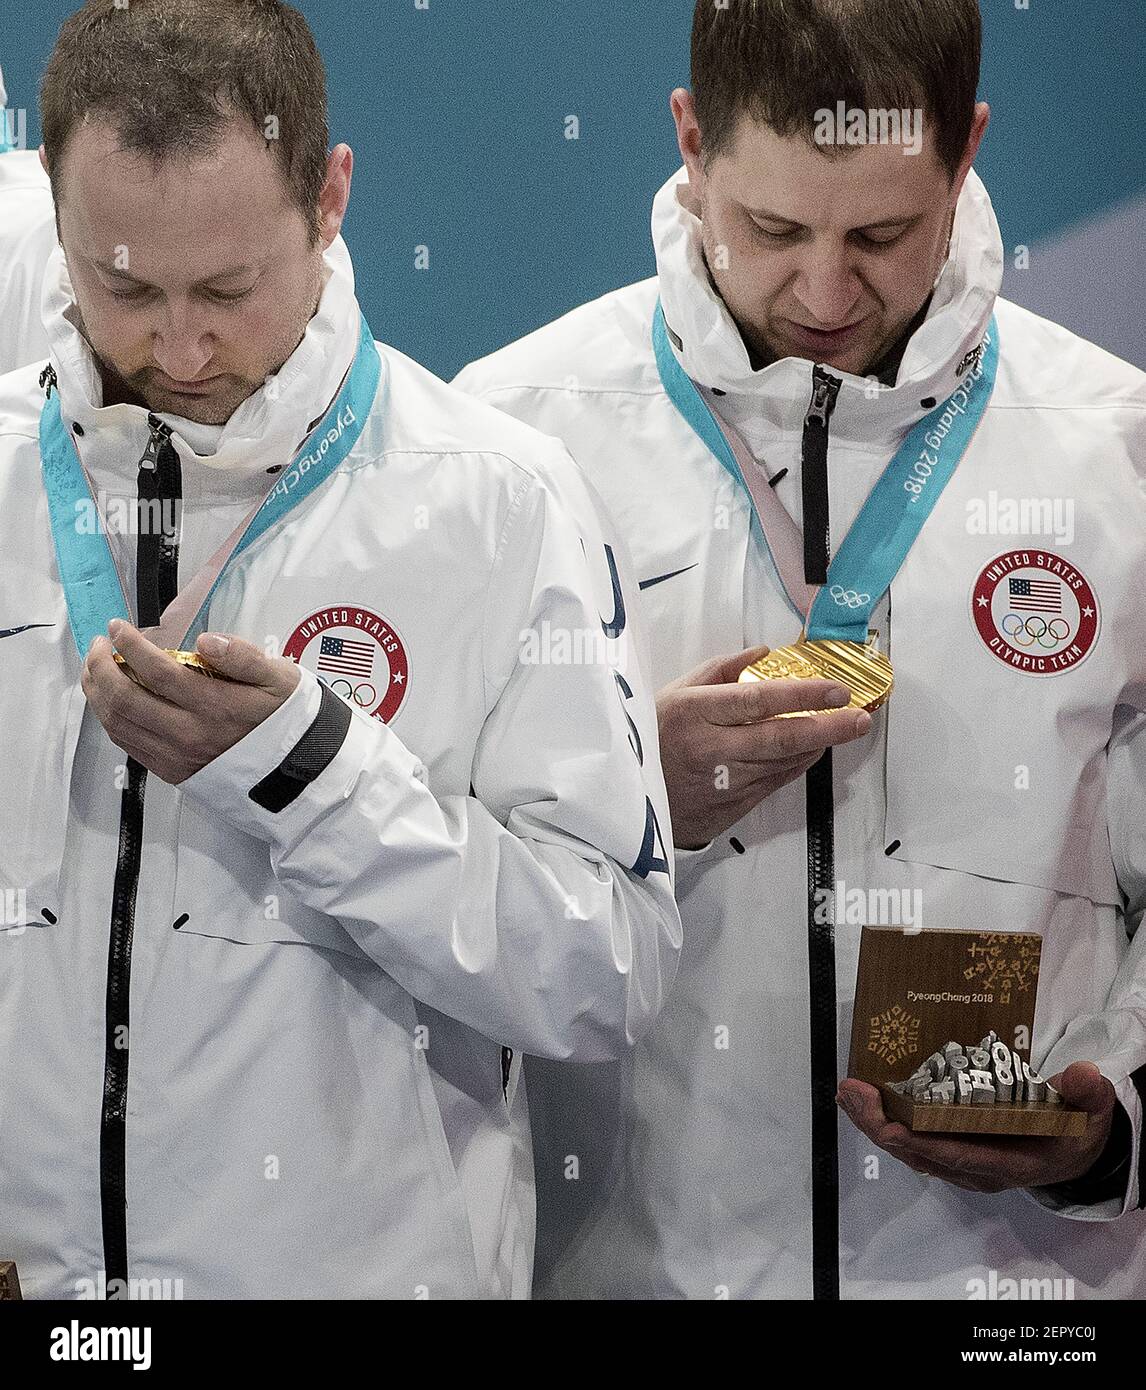 Tyler George and John Shuster of Team USA look at gold medals after a 10-7 win against Sweden on Saturday, Feb. 24, 2018, at the Pyeongchang Winter Olympics' Gangneung Curling Centre. (Photo by Carlos Gonzalez/Minneapolis Star Tribune/TNS/Sipa USA) Stock Photo